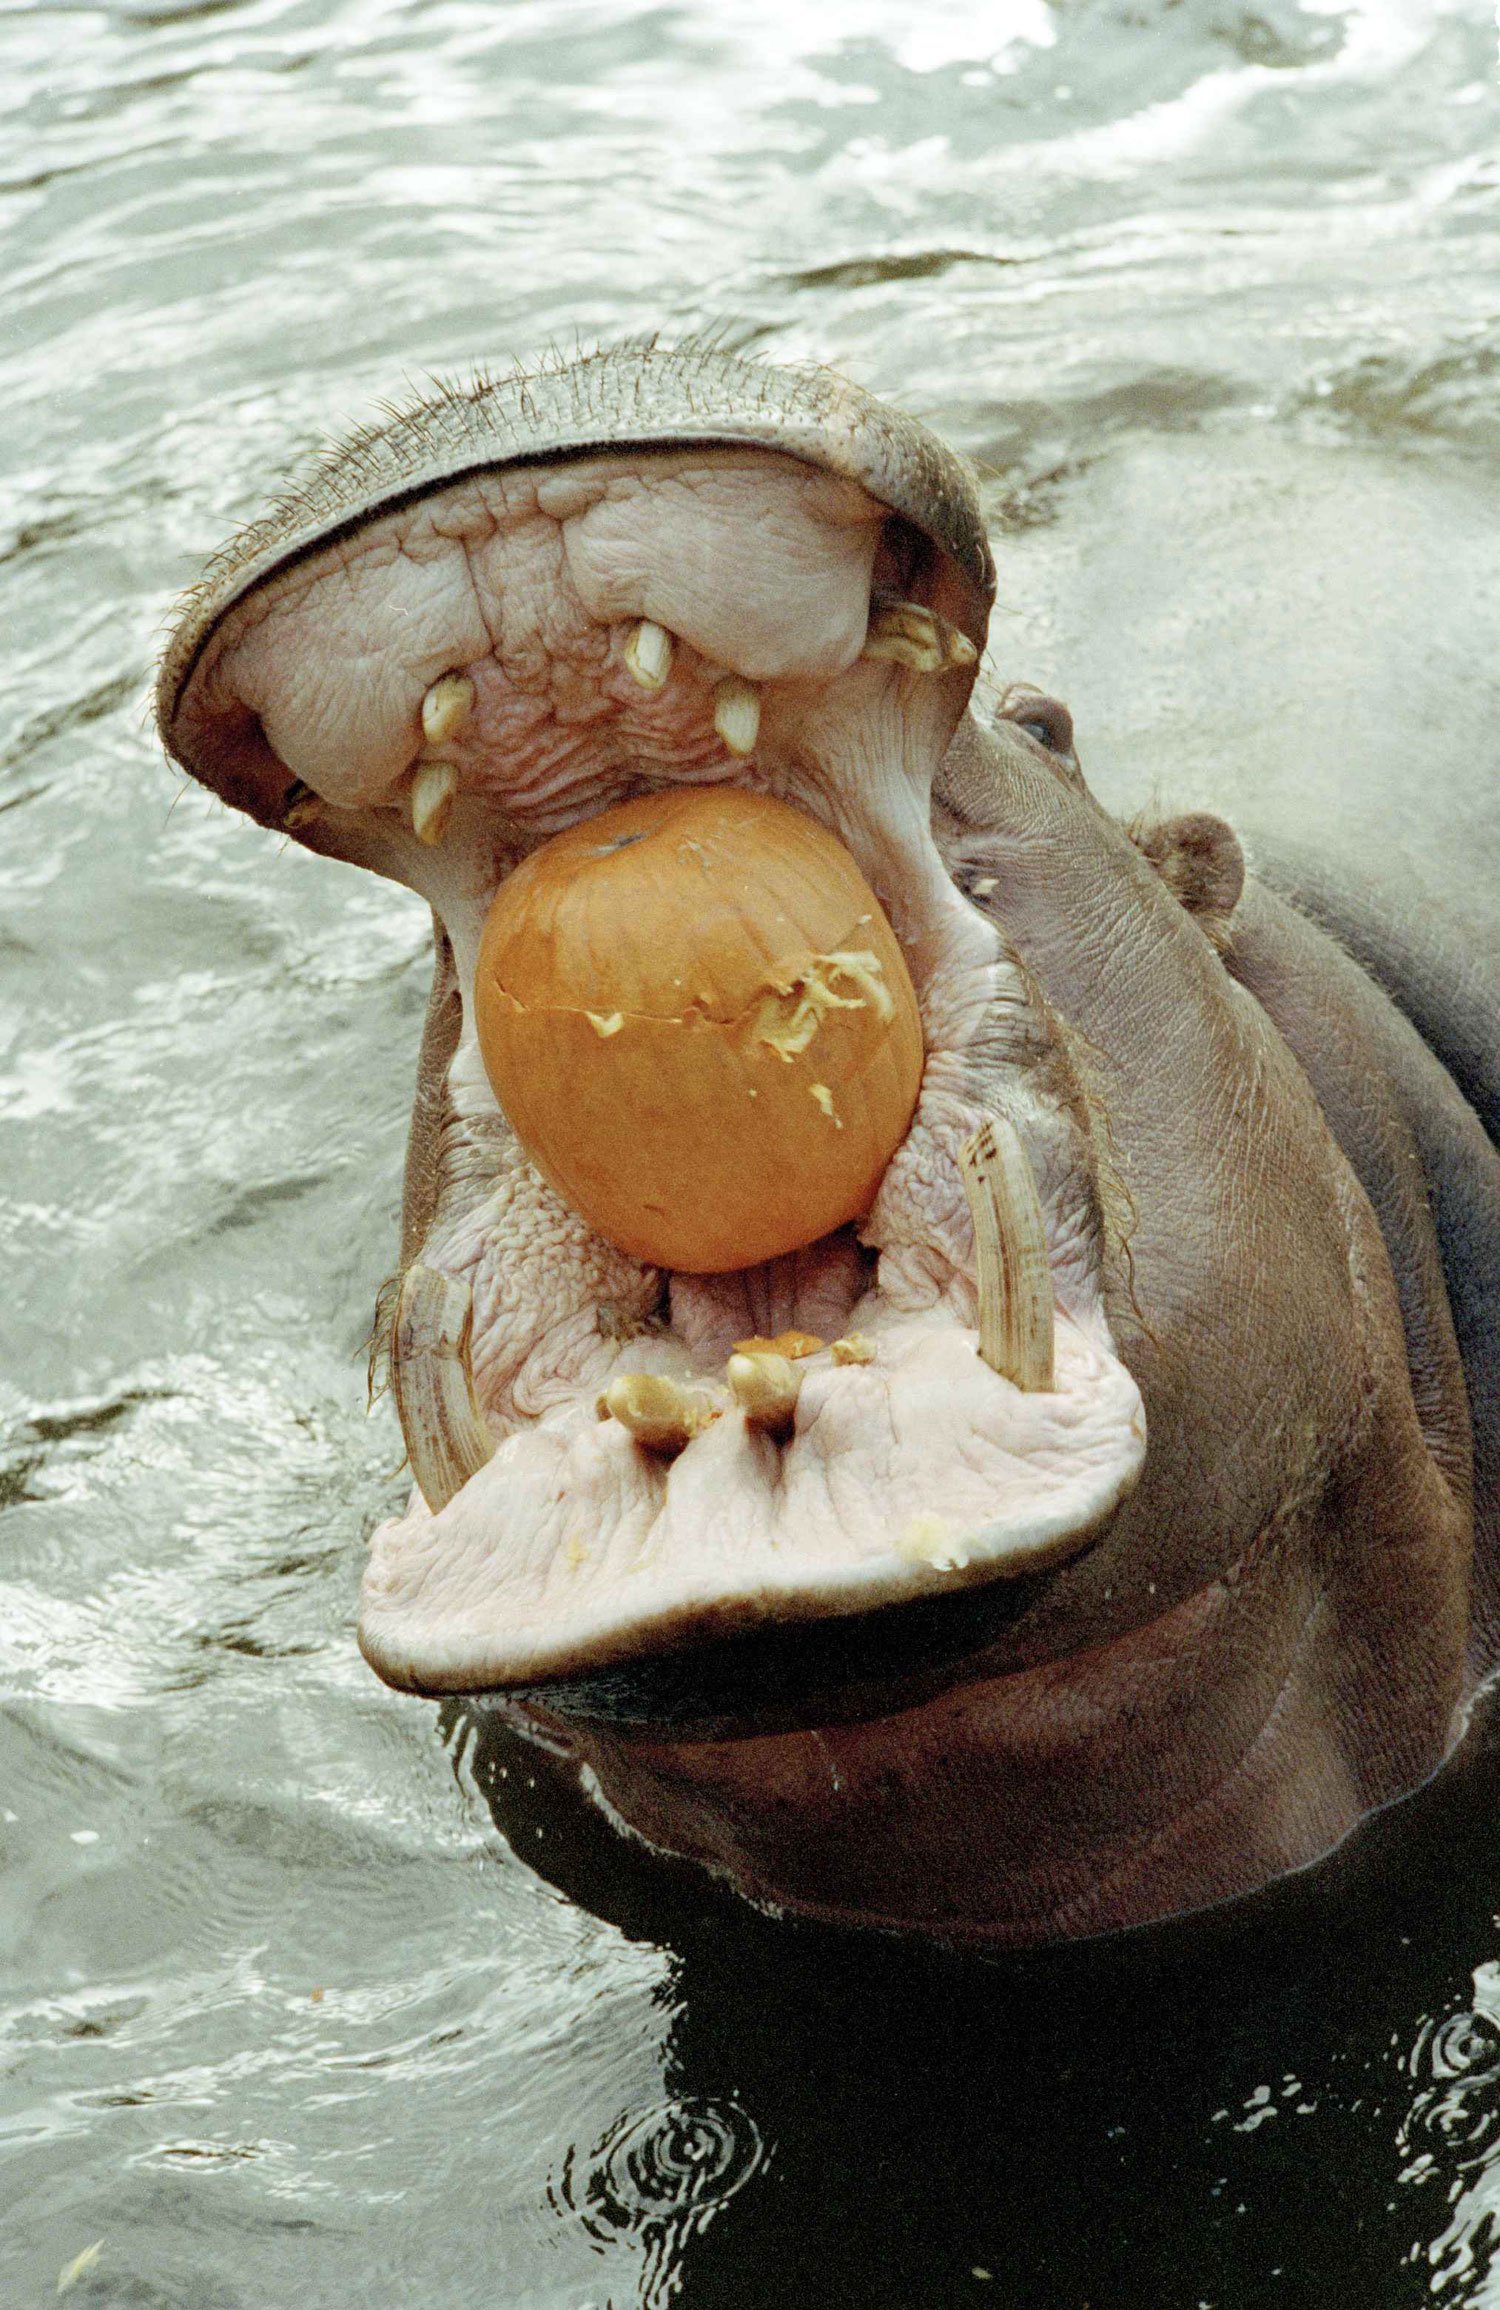  Gertrude, a two-ton hippopotamus at Woodland Park Zoo in Seattle, Wash., enjoys a Halloween snack of fresh pumpkin, Oct. 31, 1990. In addition to hippos, the zoo fed pumpkins to elephants and gorillas as a Halloween snack. (AP Photo/Jim Davidson) 